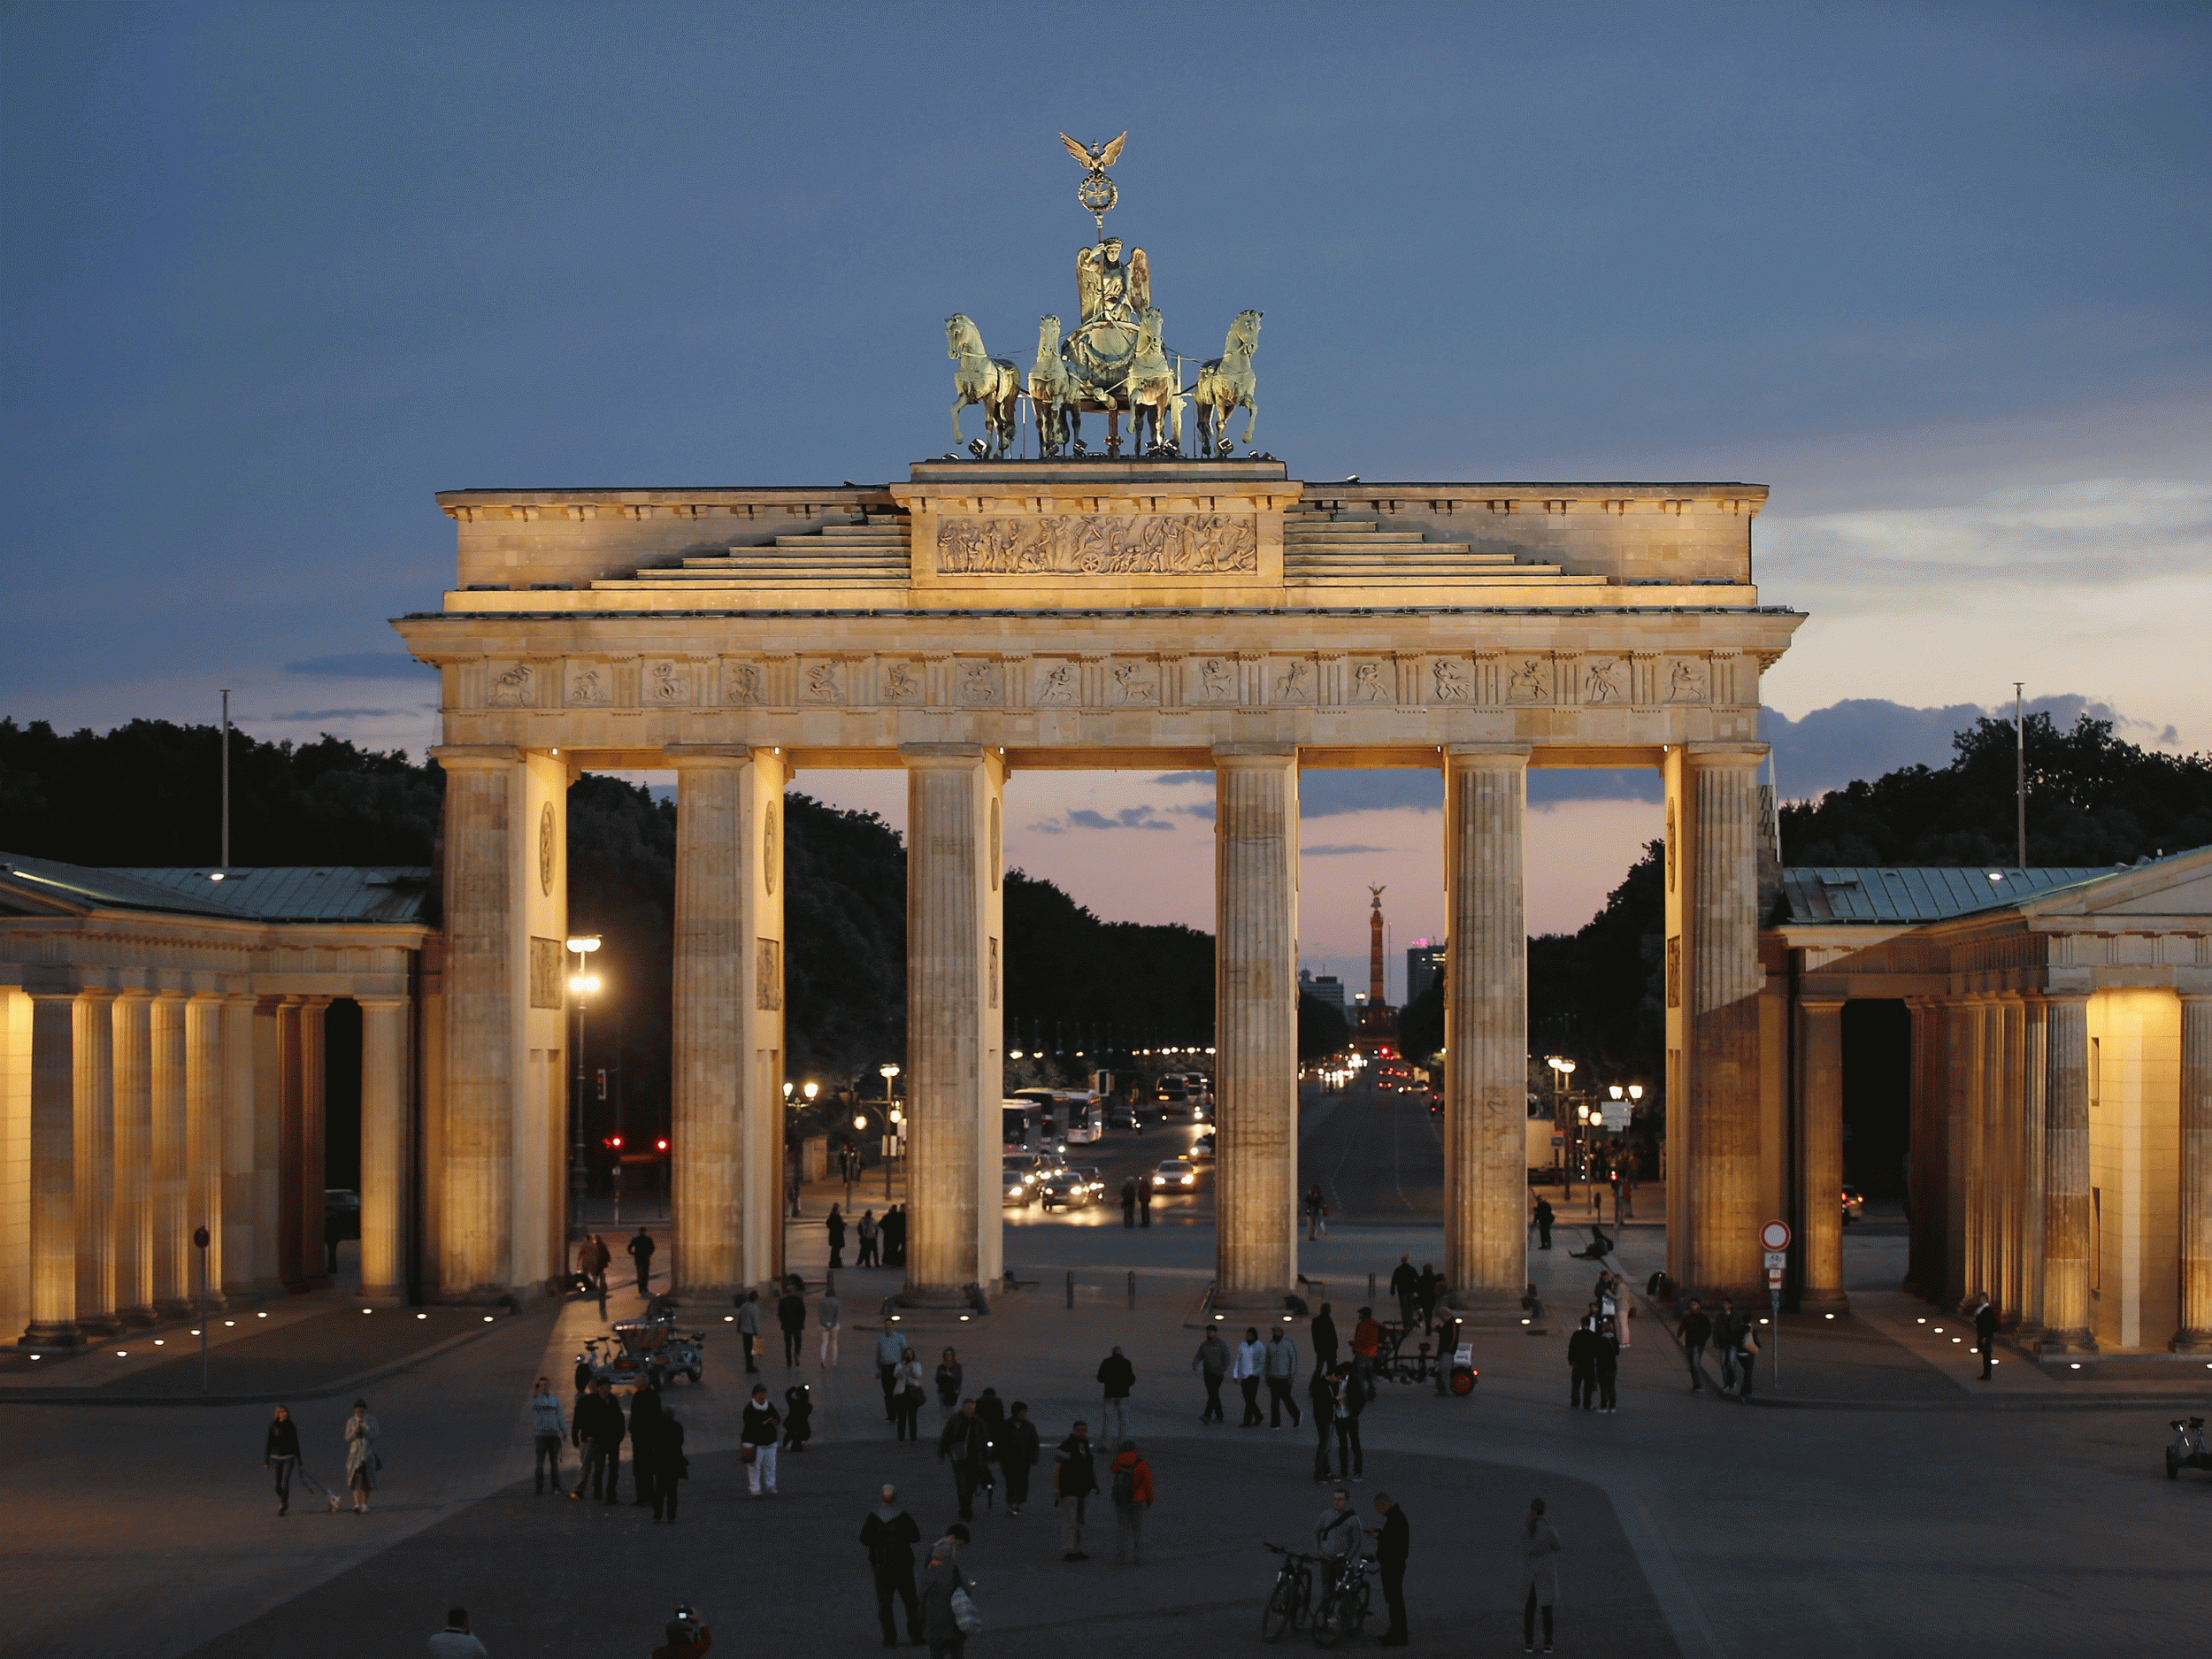 Germany's Brandenburg Gate was among the sites allegedly scouted out for a possible attack